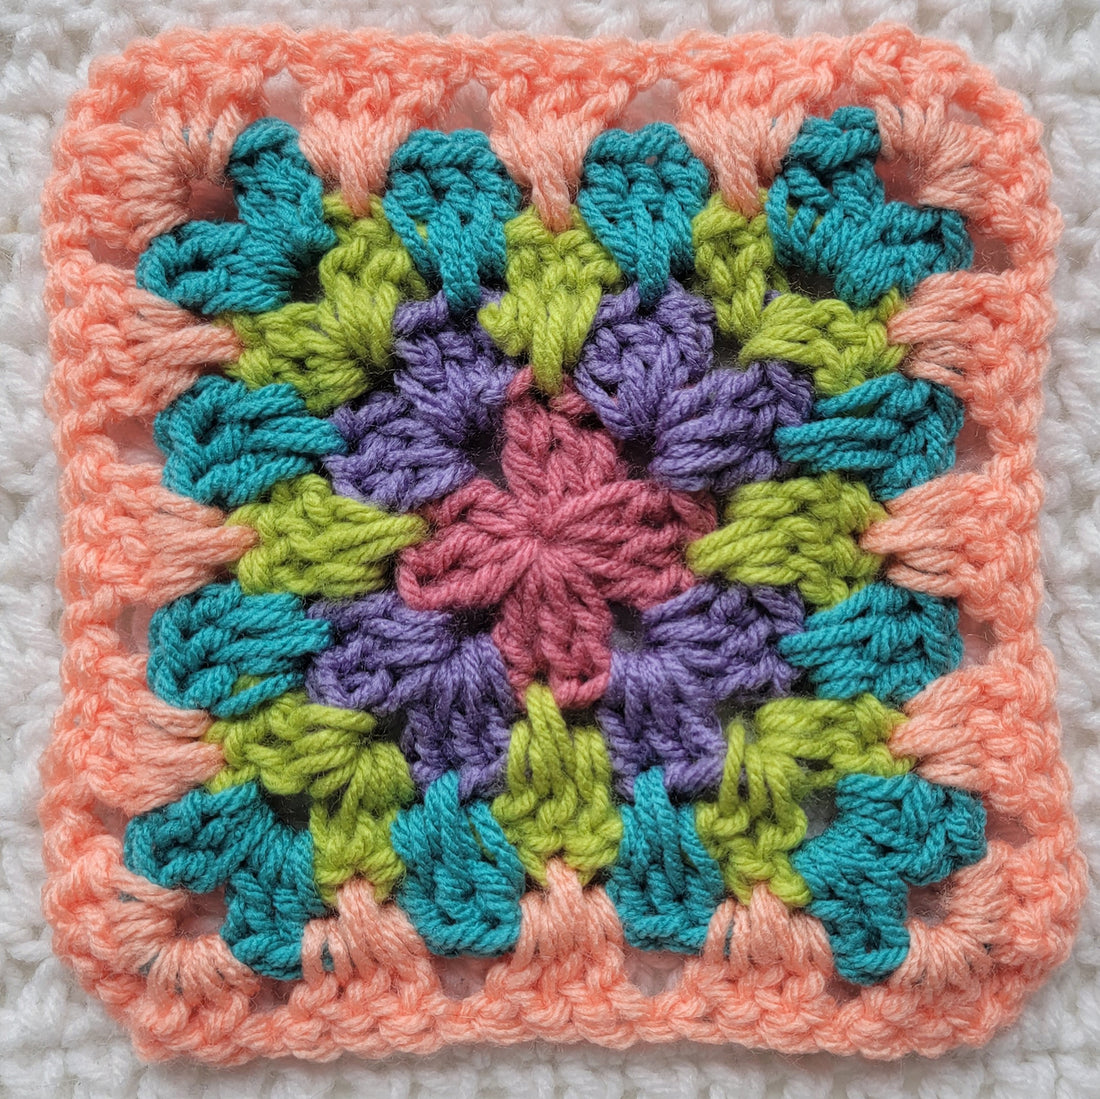 Free Crochet Pattern: Spiked Granny Square!